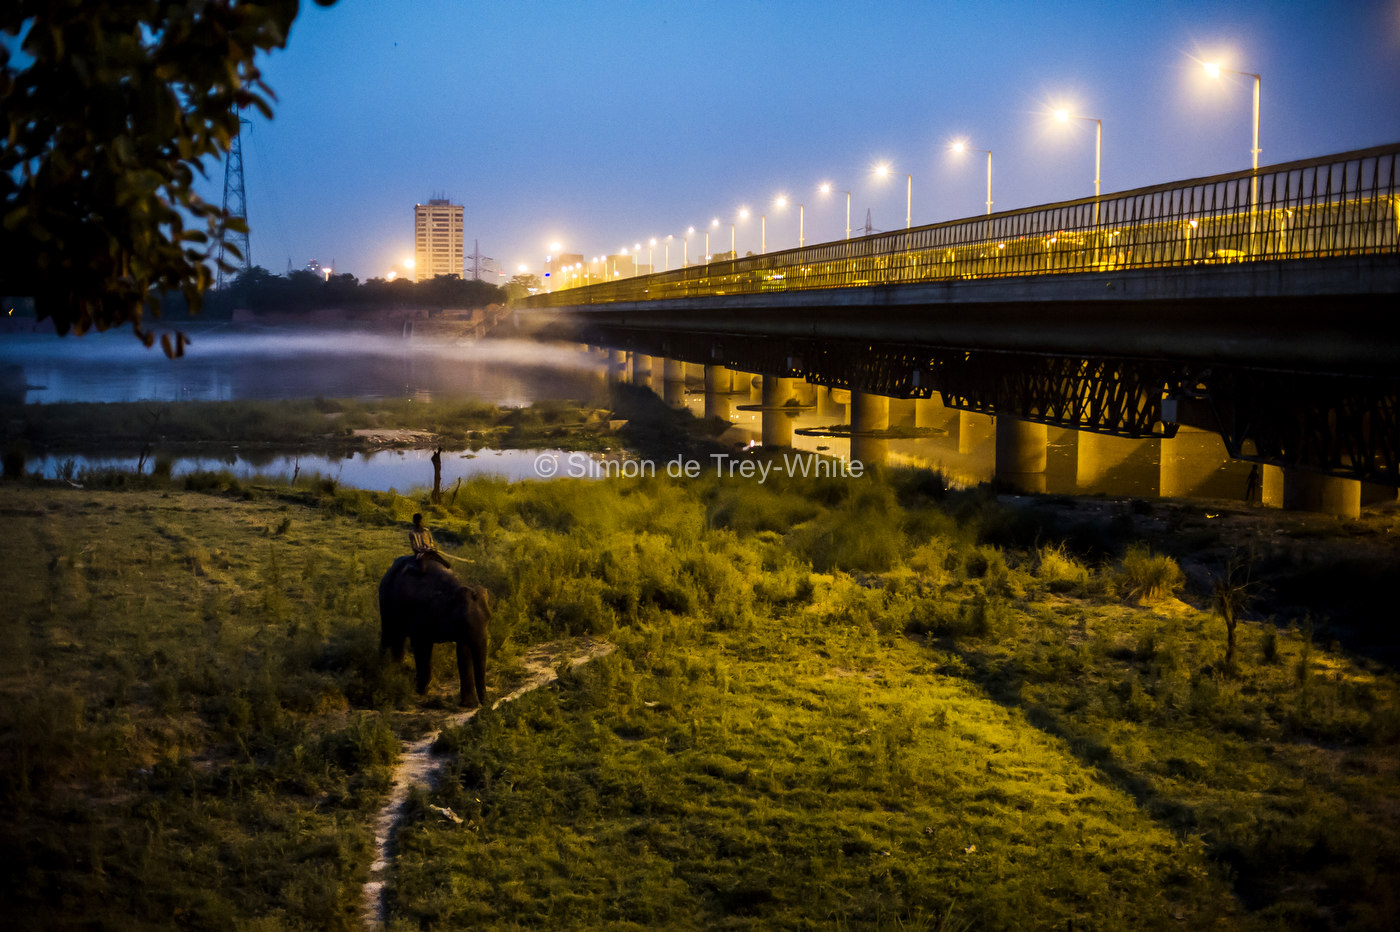 An image form my documentary project 'Delhi's Last Urban Elephant's' as featured on my new website